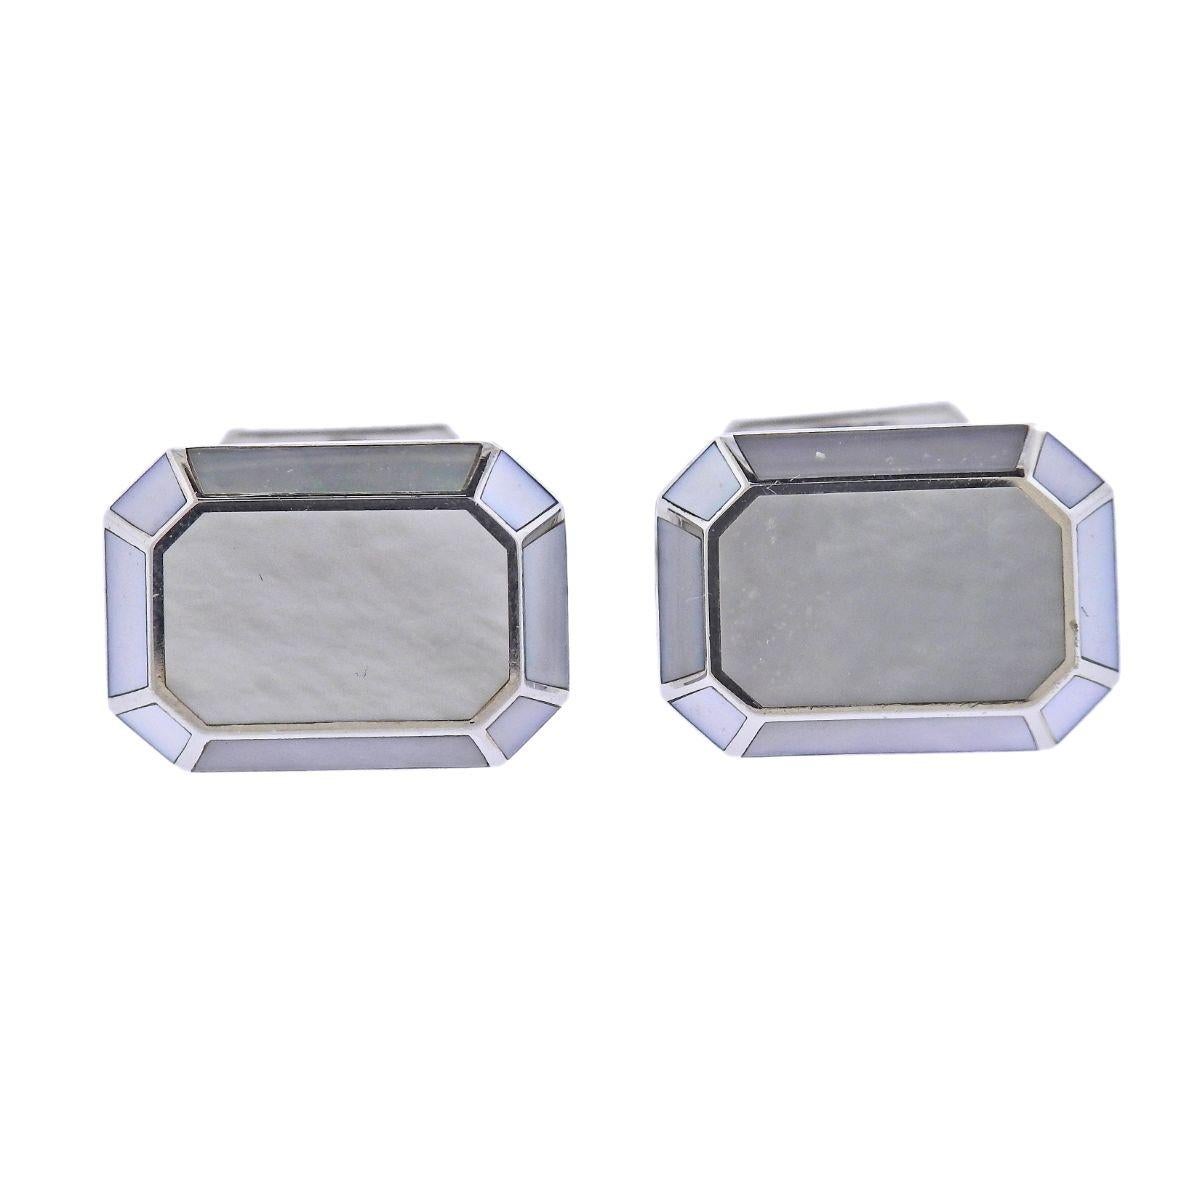 Pair of 18k white gold classic cufflinks by Harry Winston, set with mother of pearl. Cufflink top is 18mm x 13mm. Weigh 17.5 grams. Marked: HW, 750, 139541. Comes in original HW box.